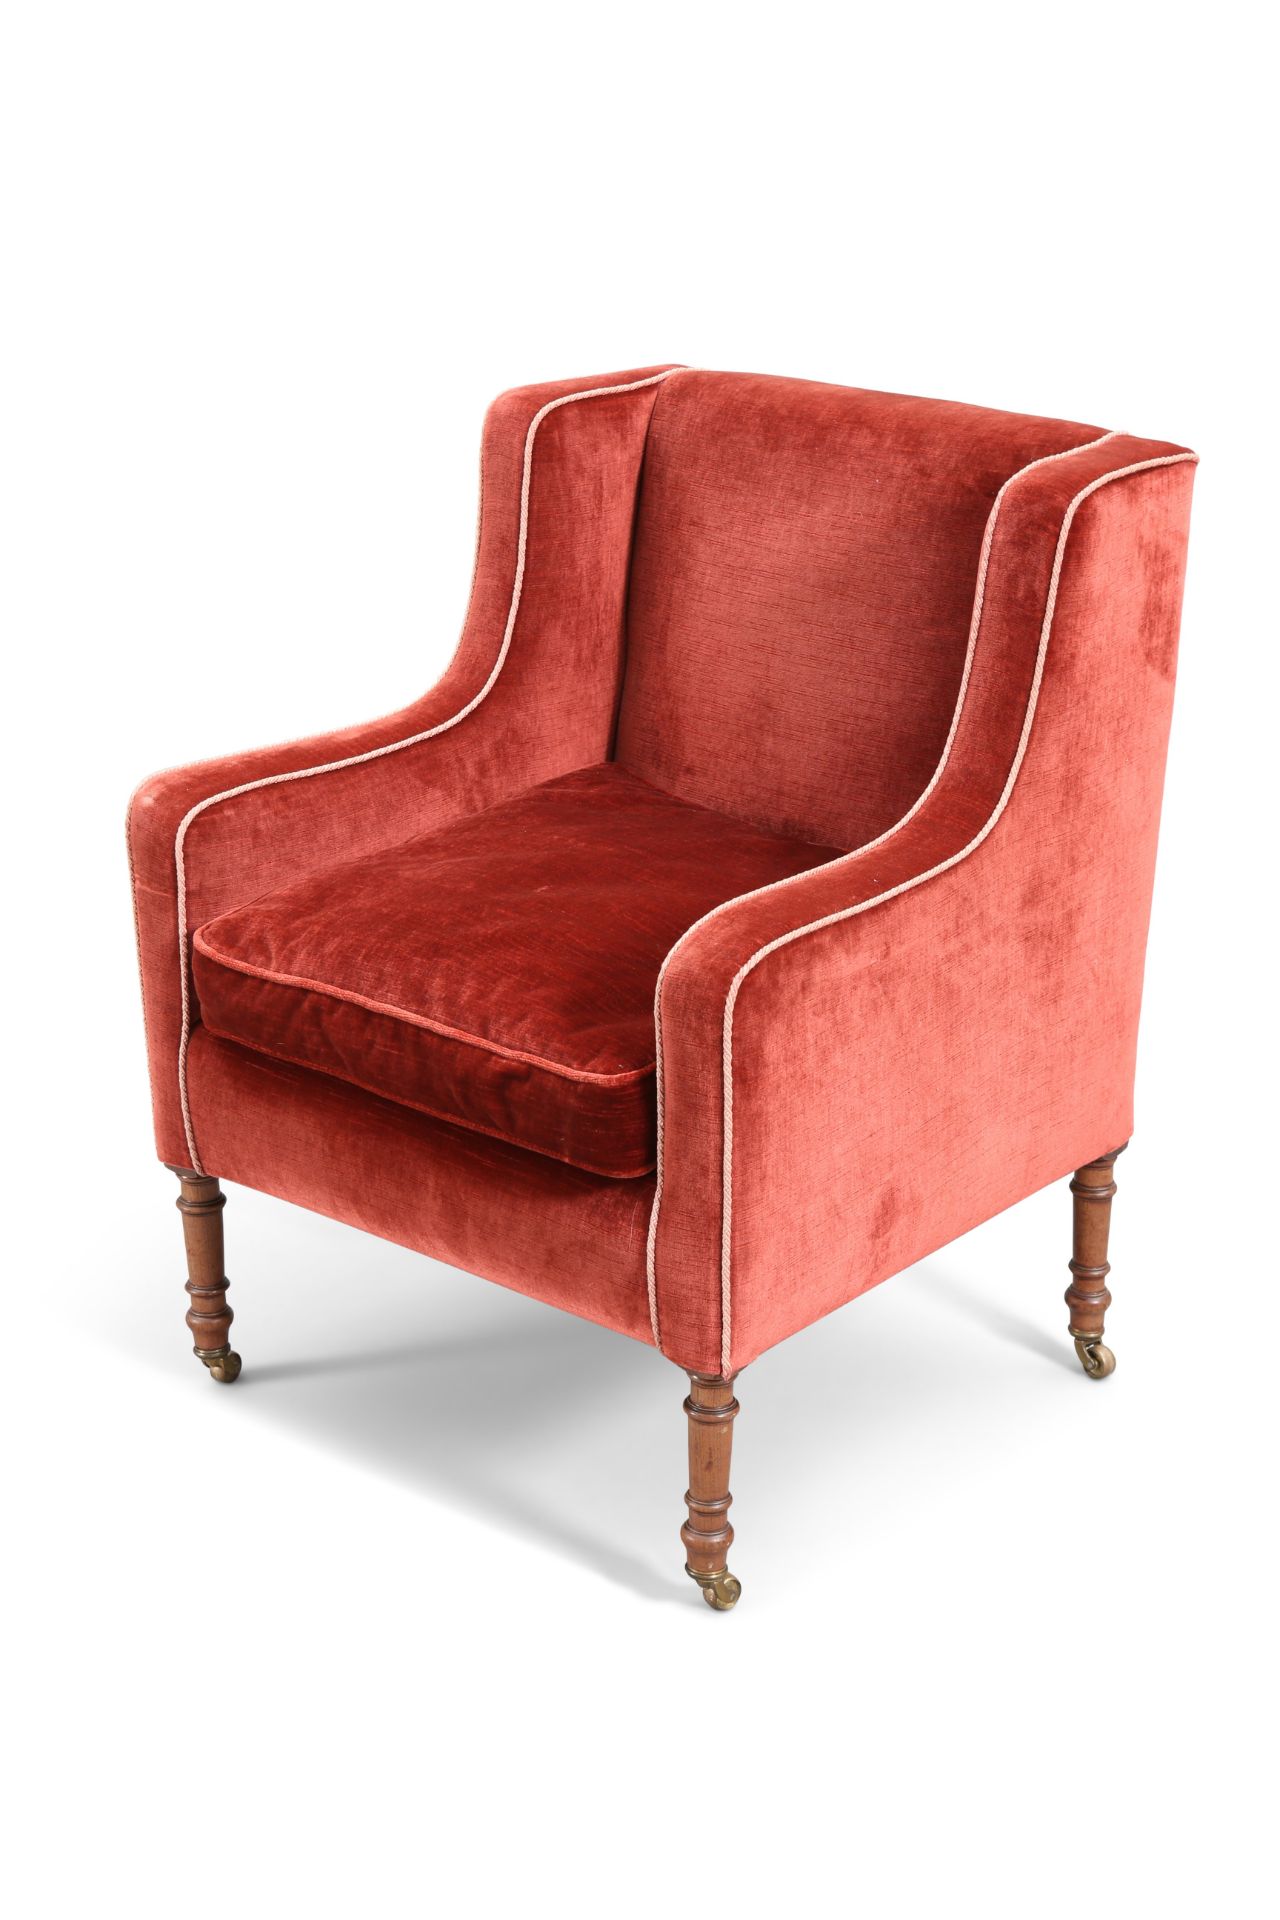 A LATE REGENCY MAHOGANY AND UPHOLSTERED LIBRARY ARMCHAIR